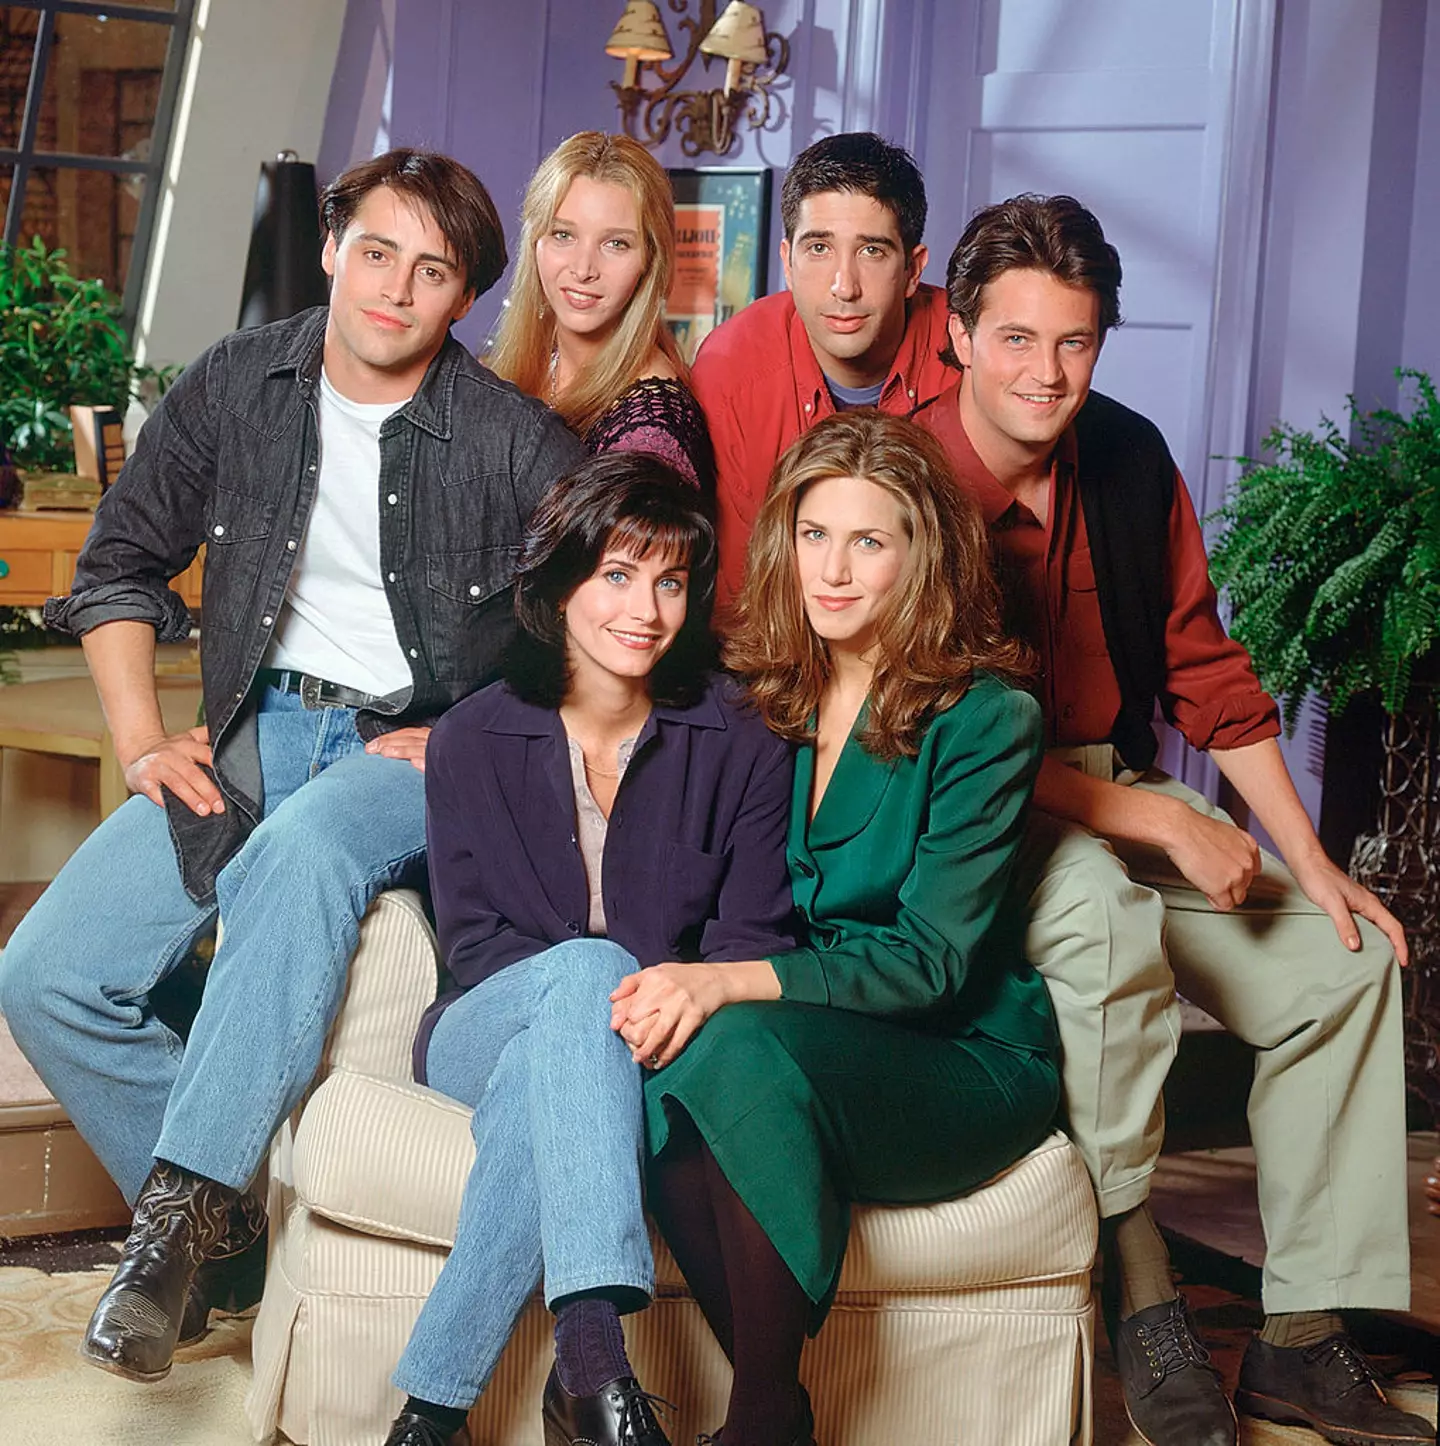 Perry starred on Friends as Chandler Bing from 1994-2004. (Reisig & Taylor/NBCU Photo Bank/NBCUniversal via Getty Images)